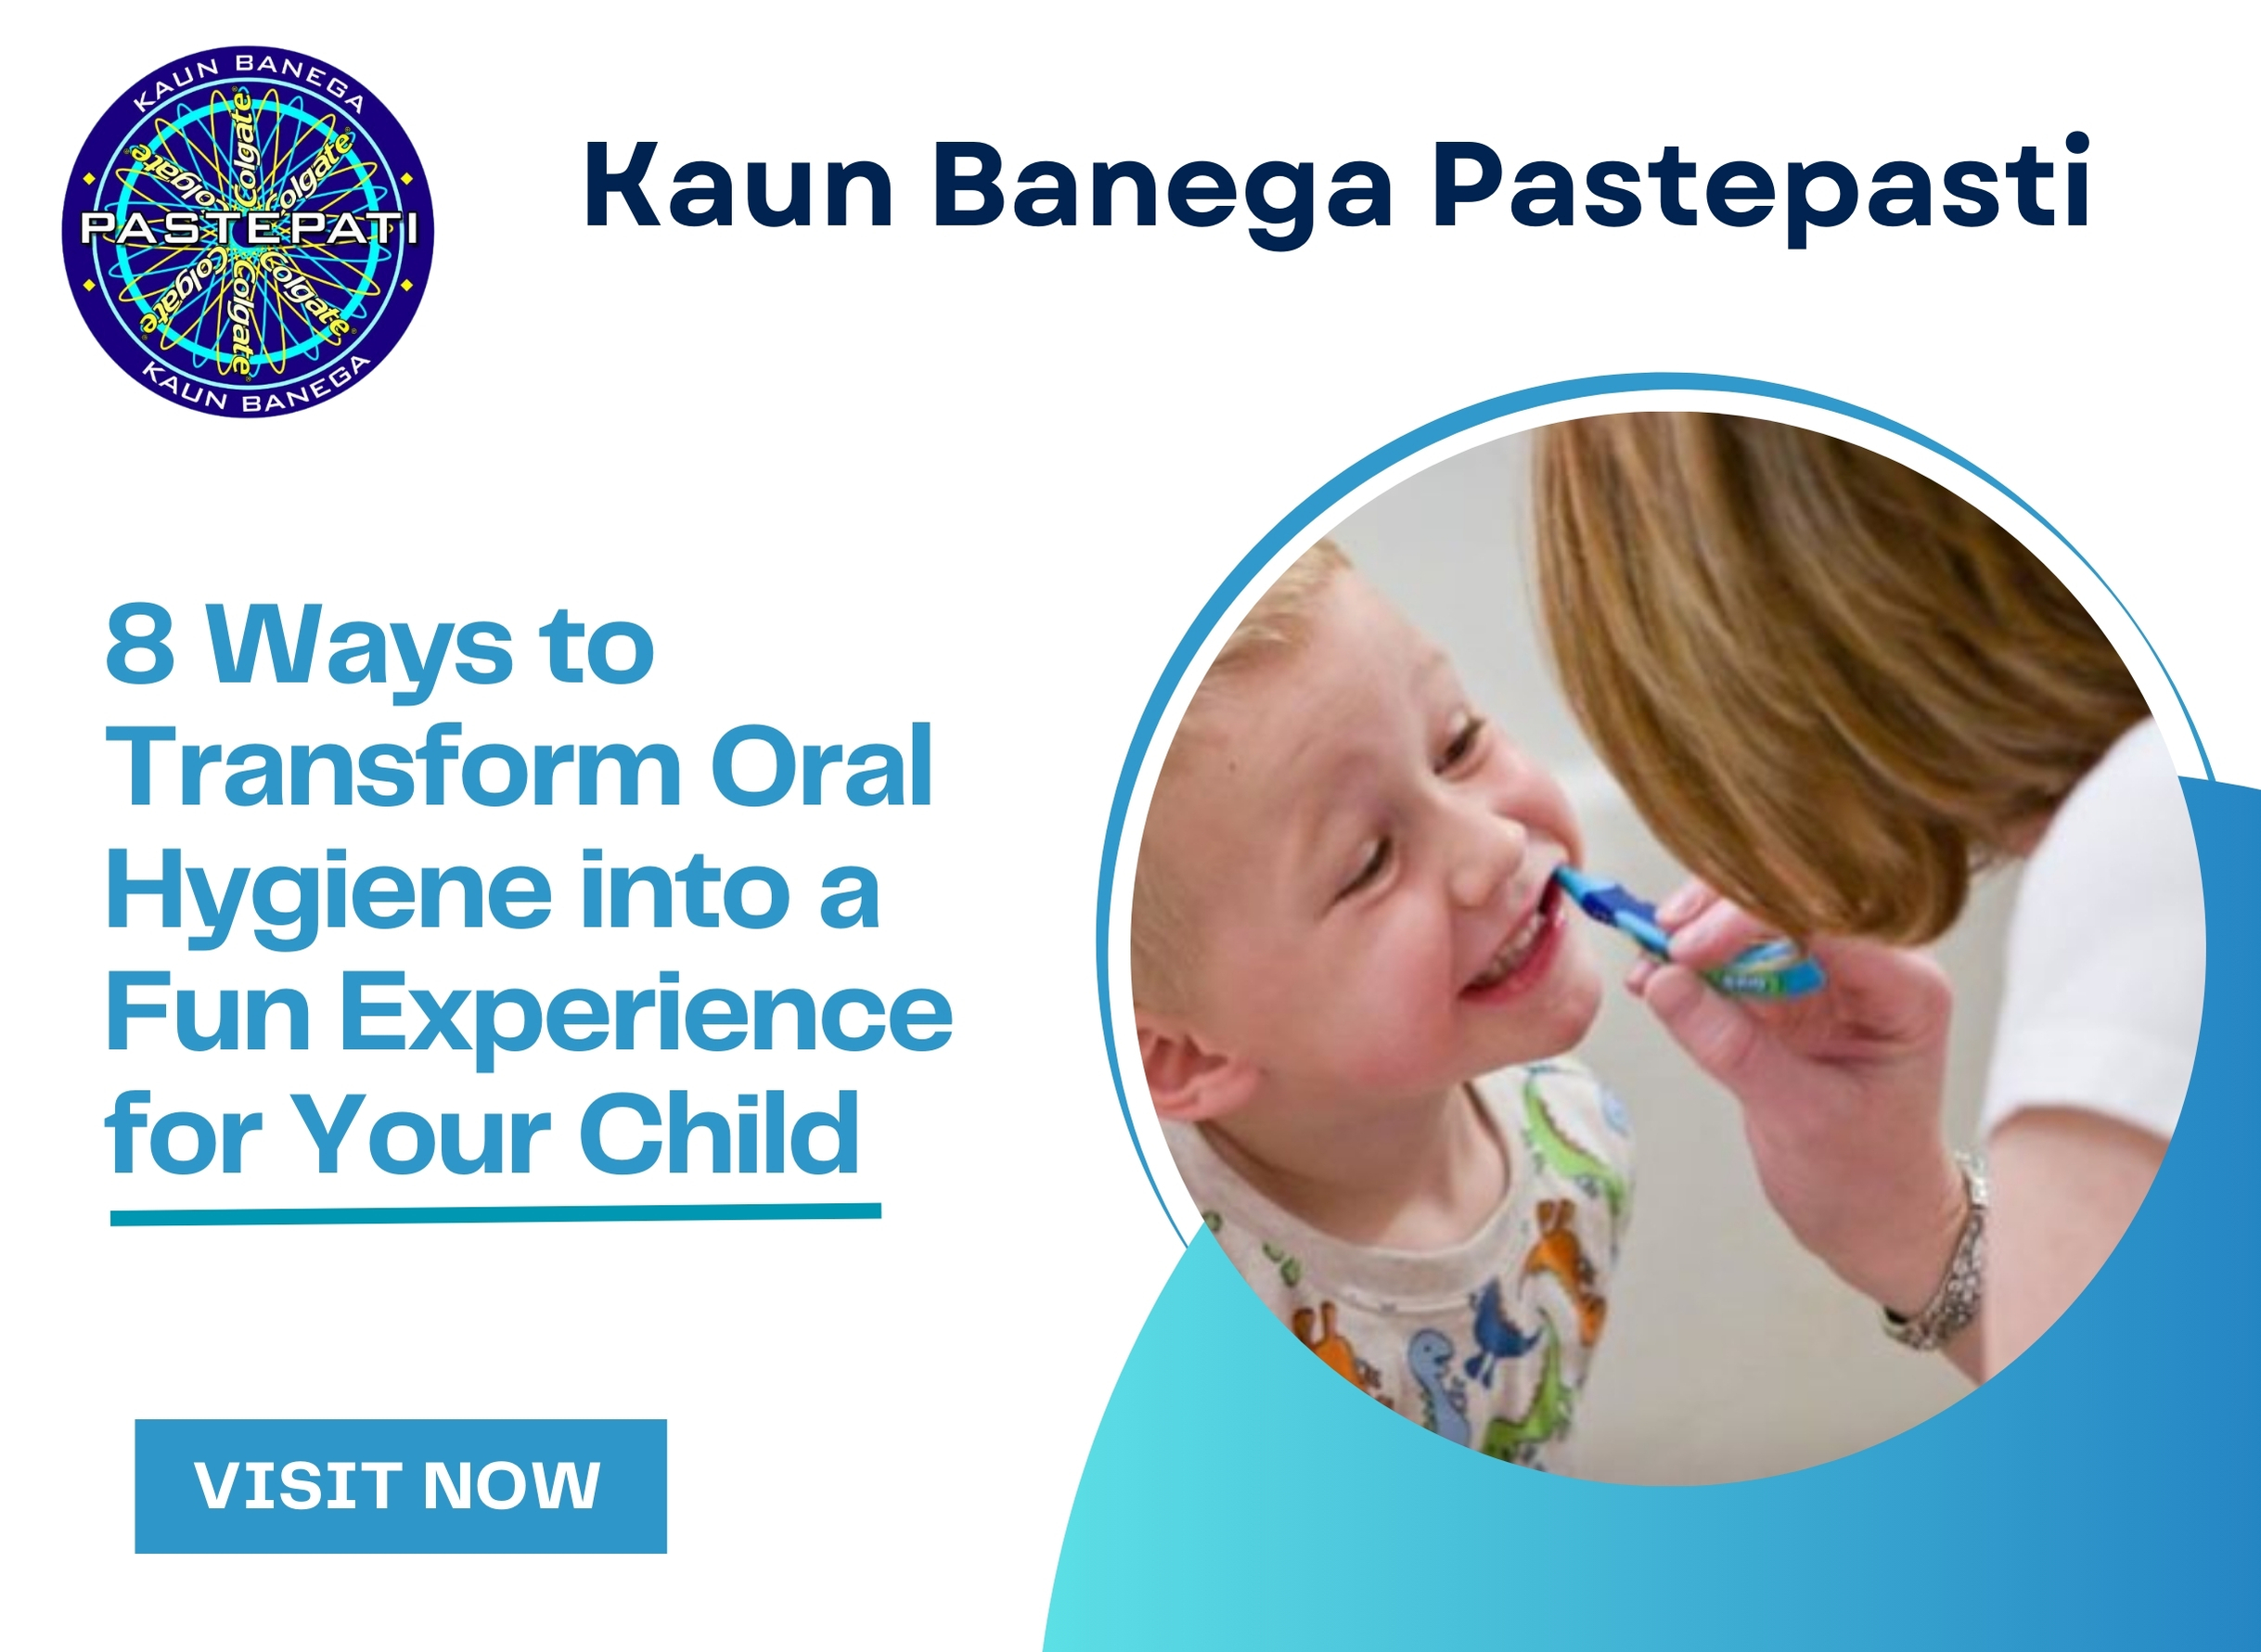 8 Ways to Transform Oral Hygiene into a Fun Experience for Your Child